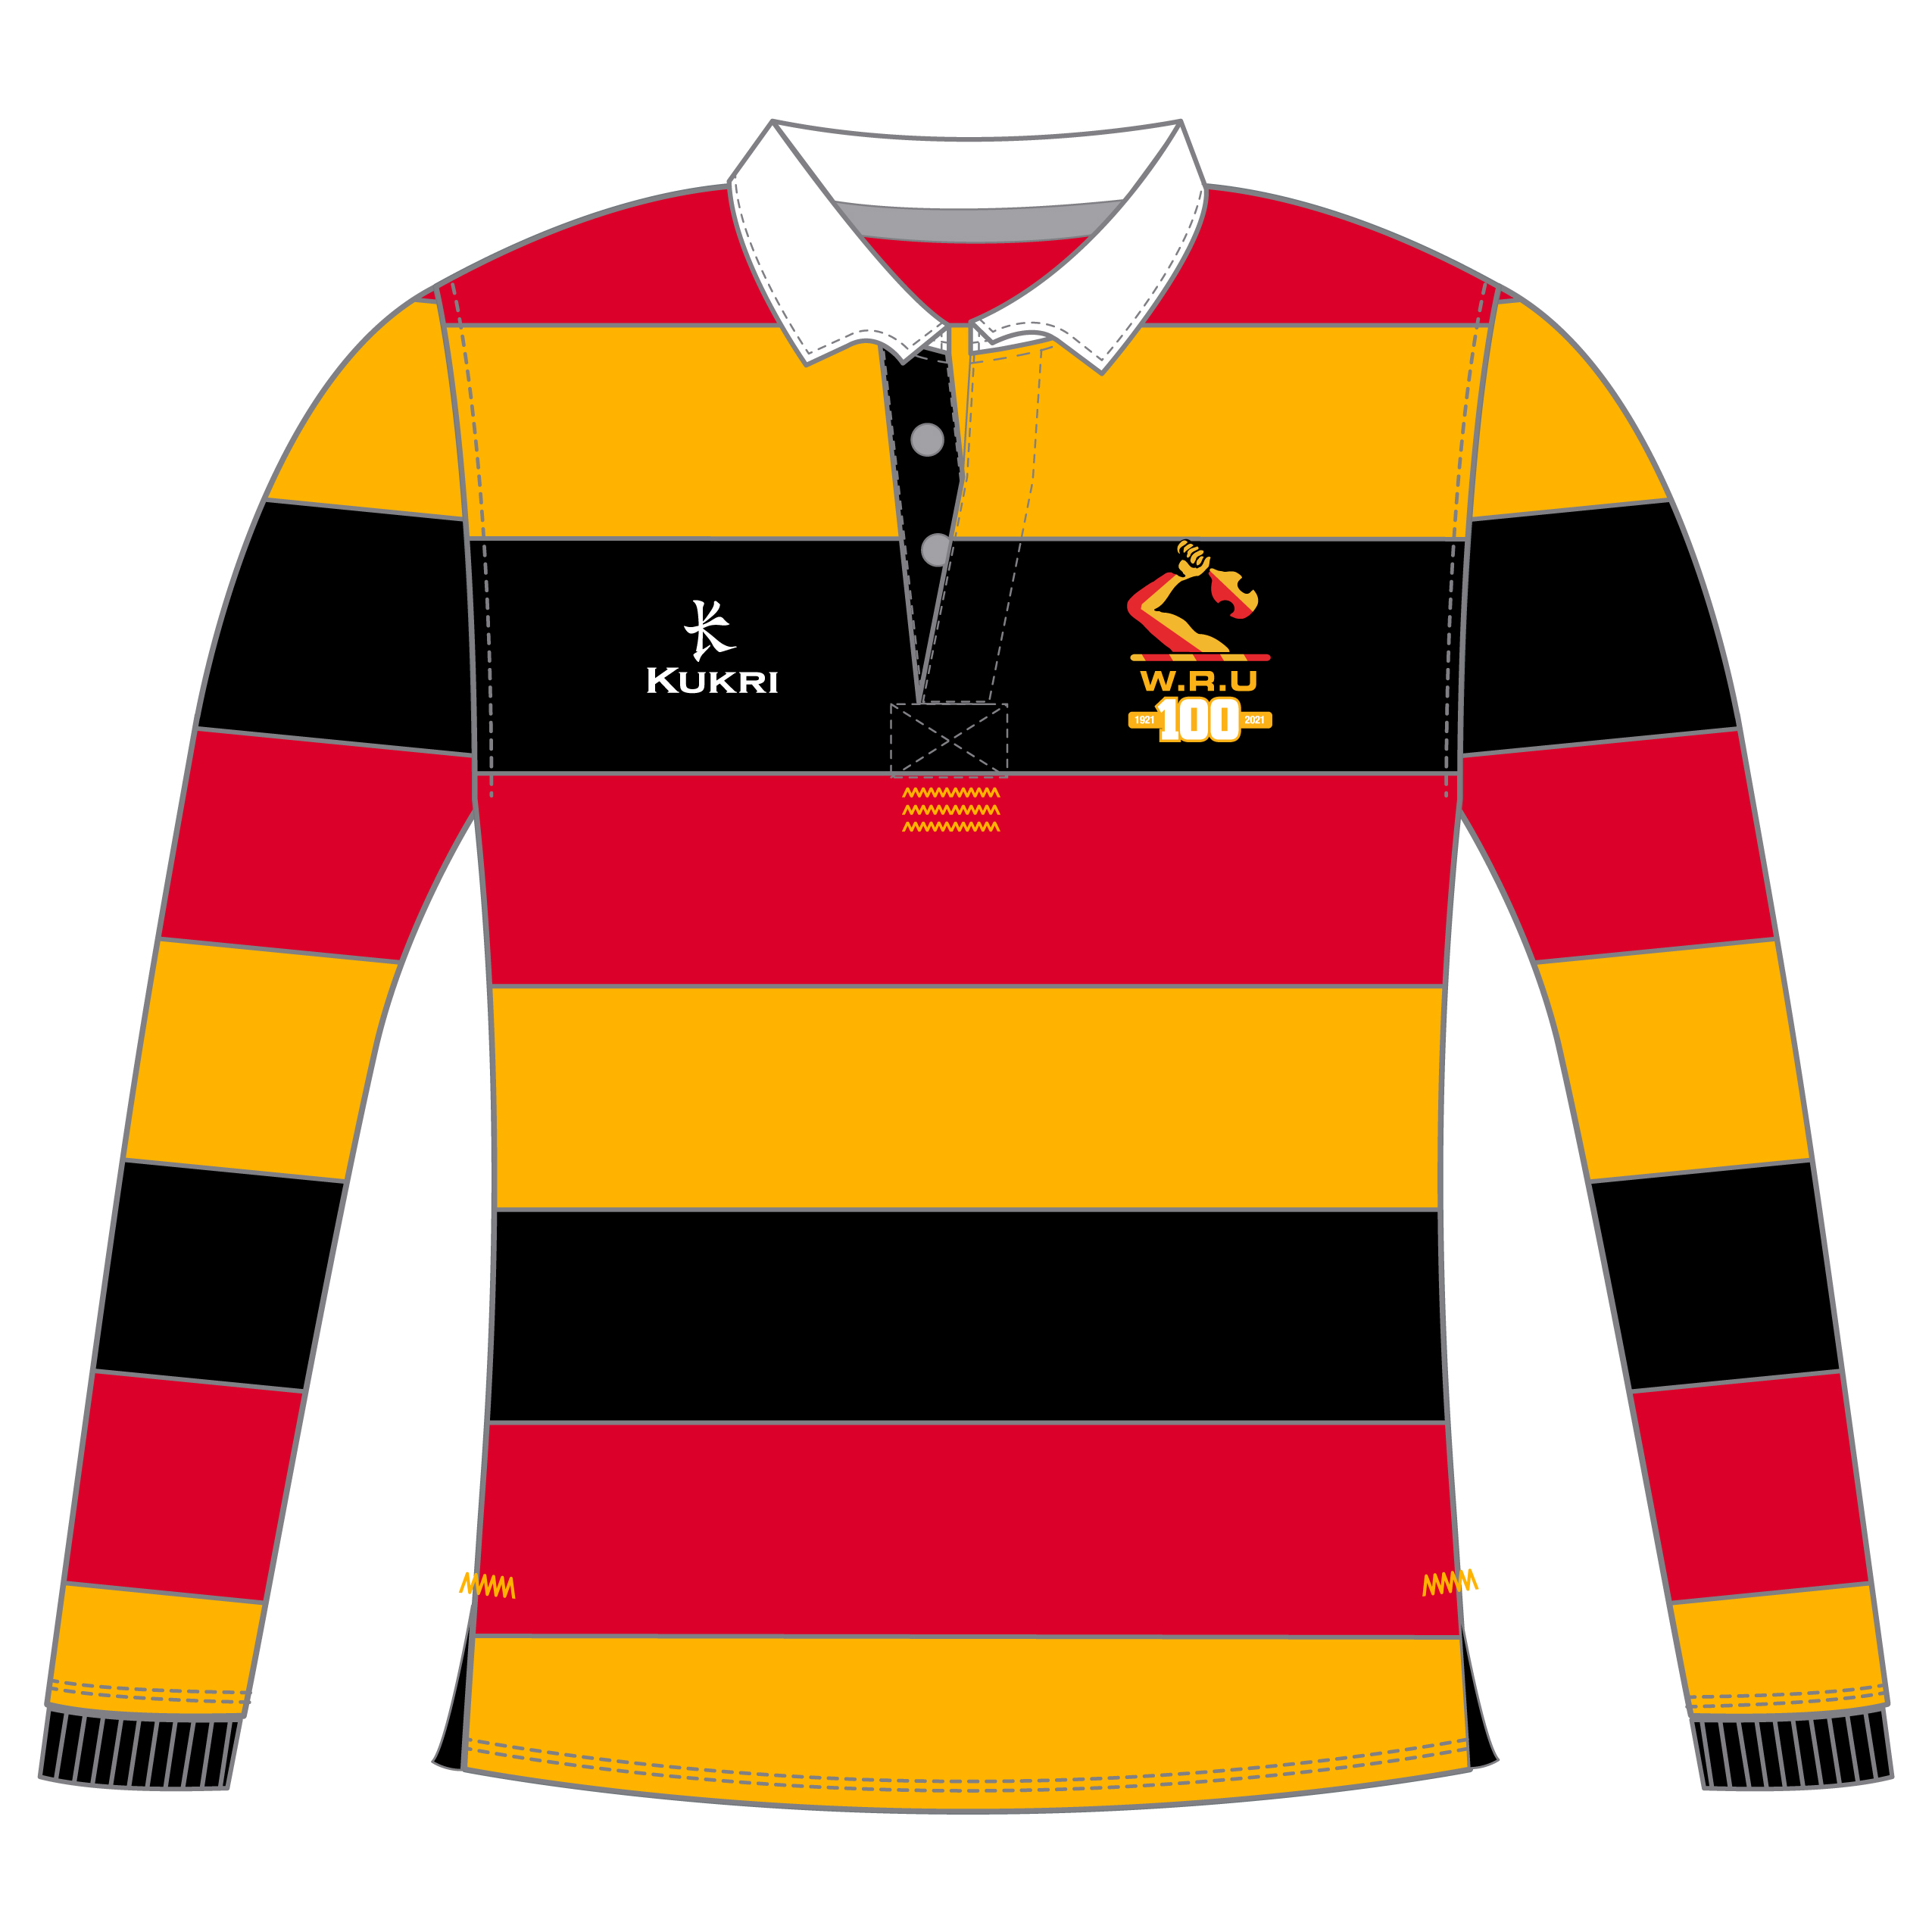 Waikato Rugby Online Shop Kukri Sports Product Details